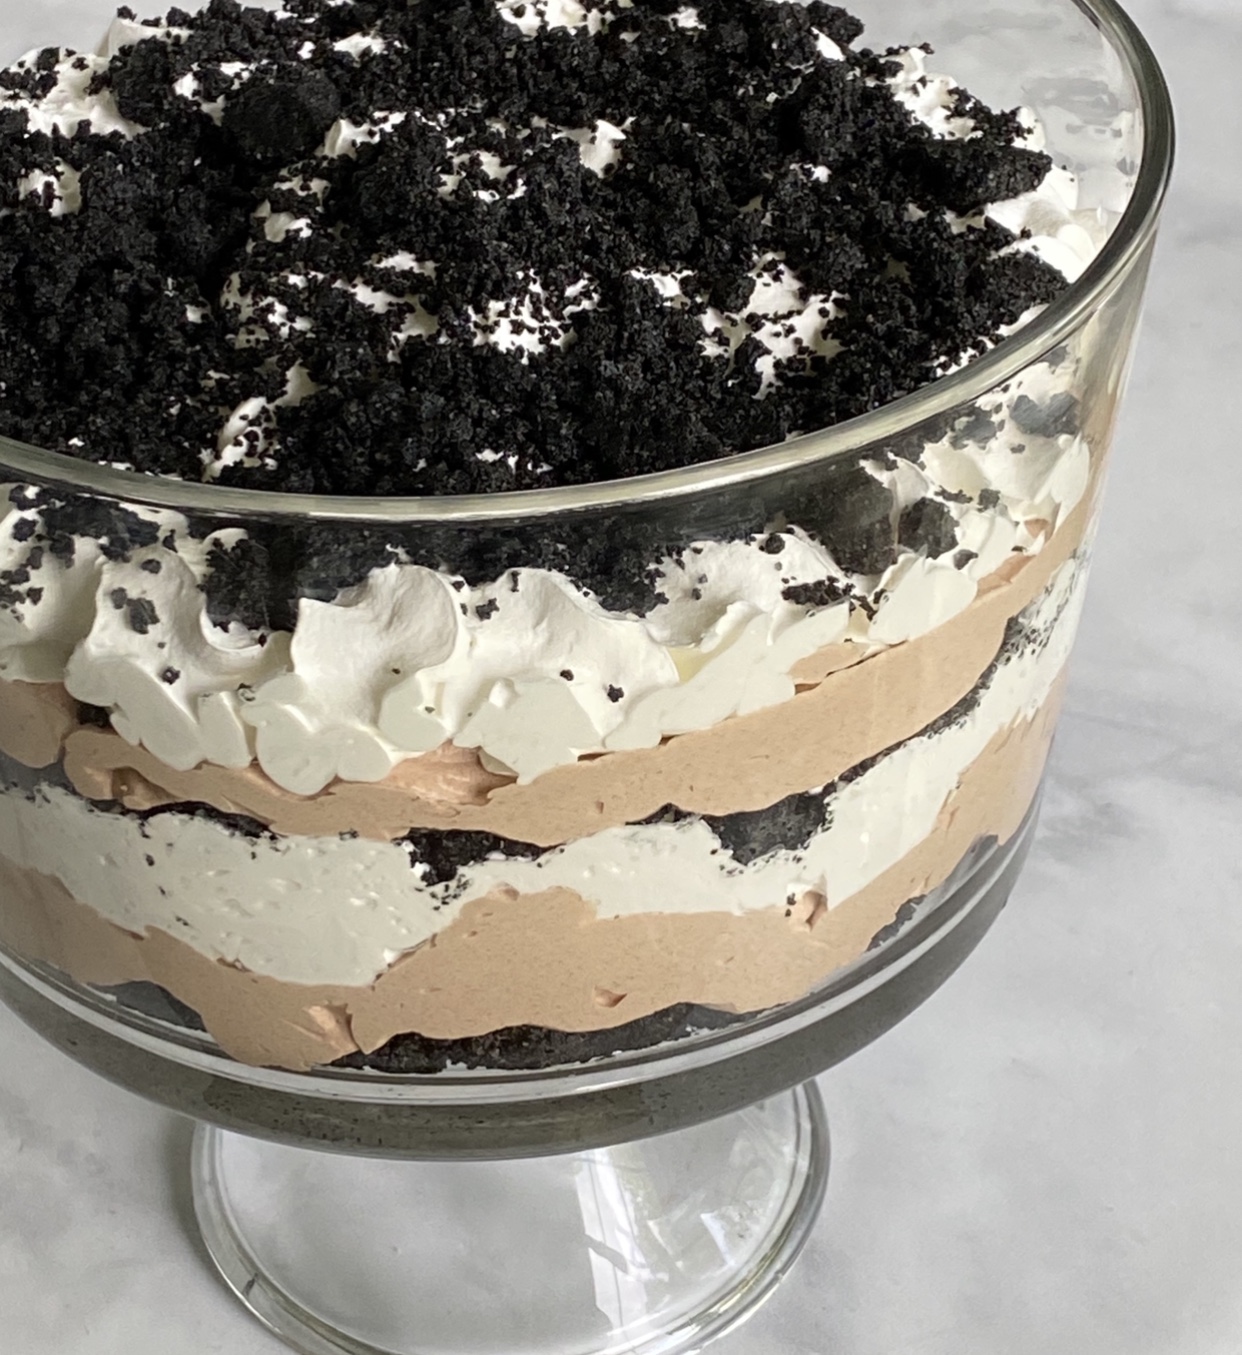 A glass trifle bowl with oreo dirt cake in it.  